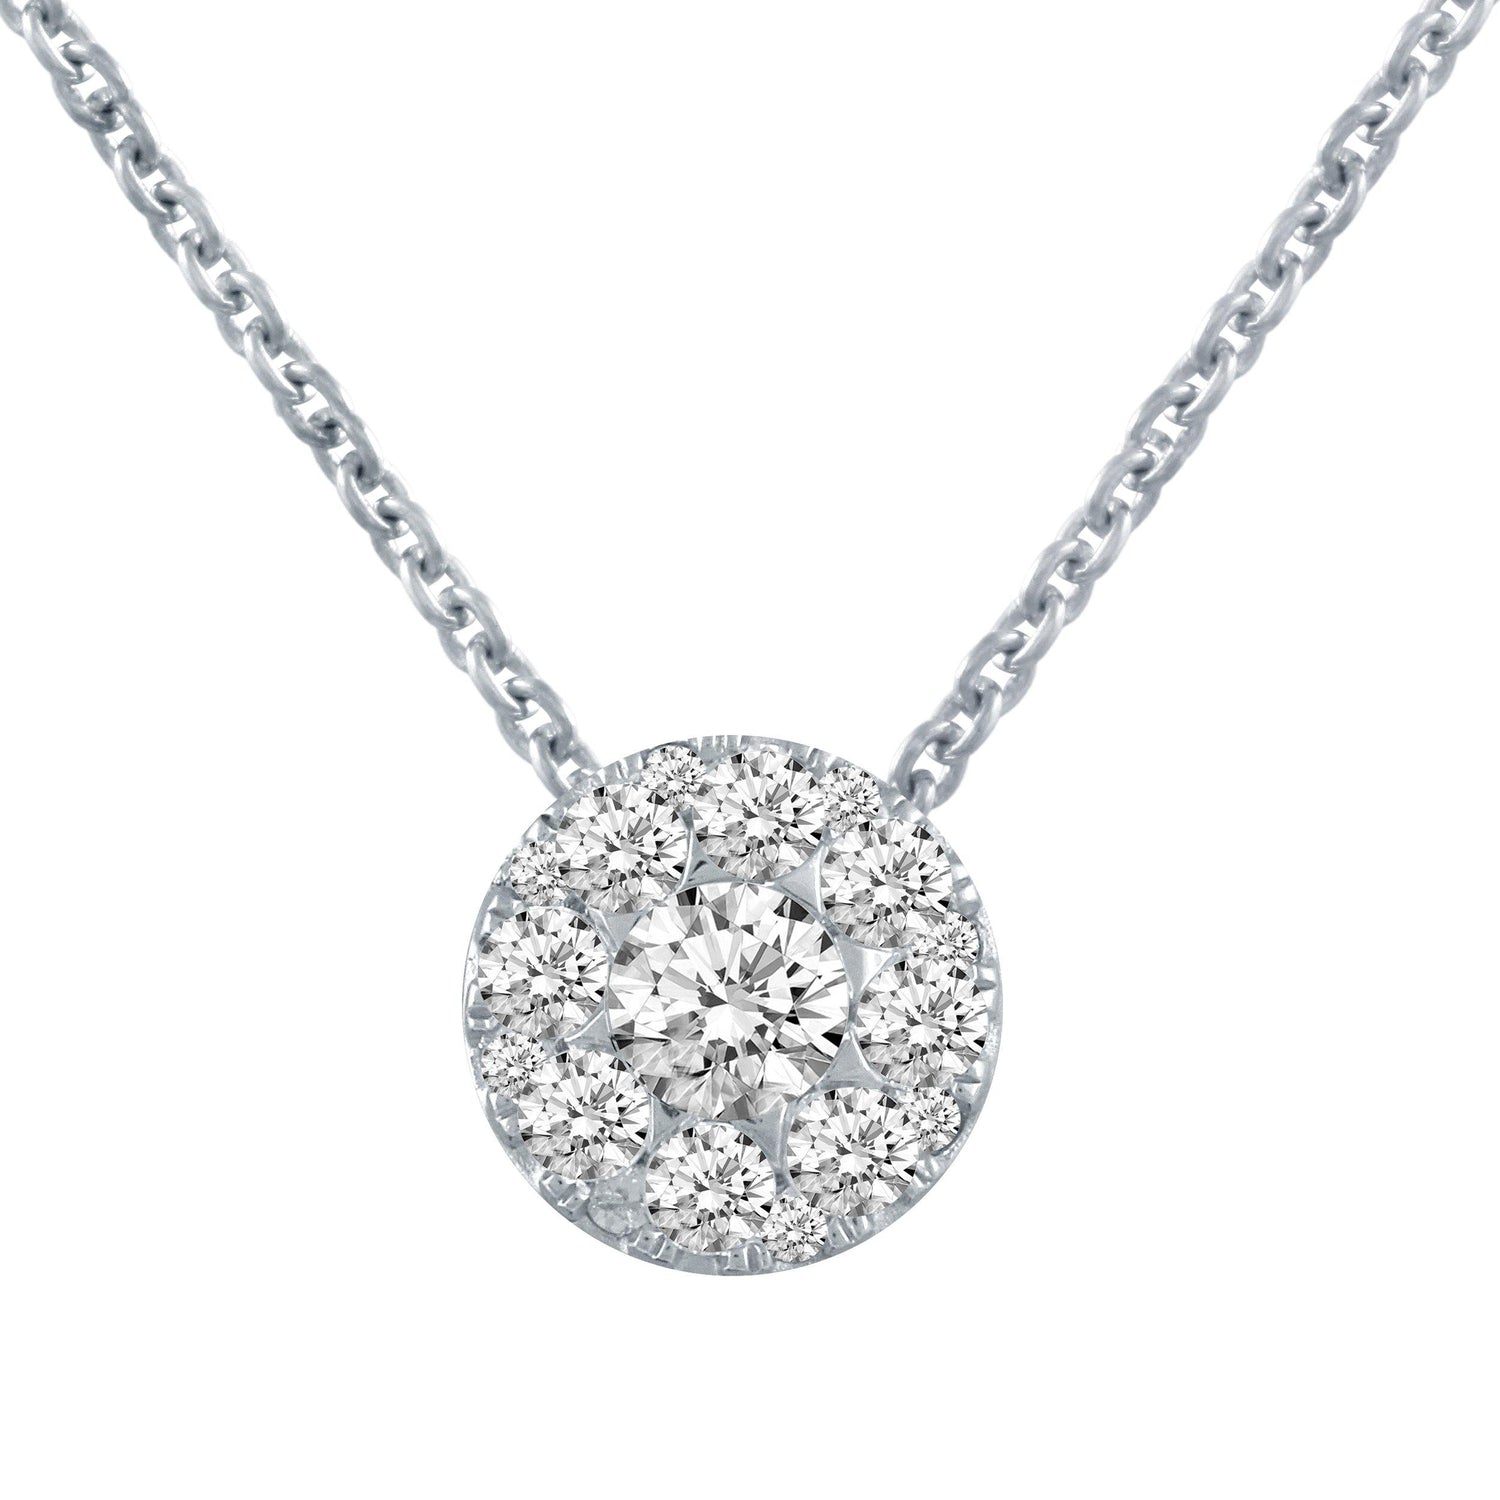 1/4CT TW Diamond cluster Pendant in Sterling Silver with 18inch cable chain - Fifth and Fine